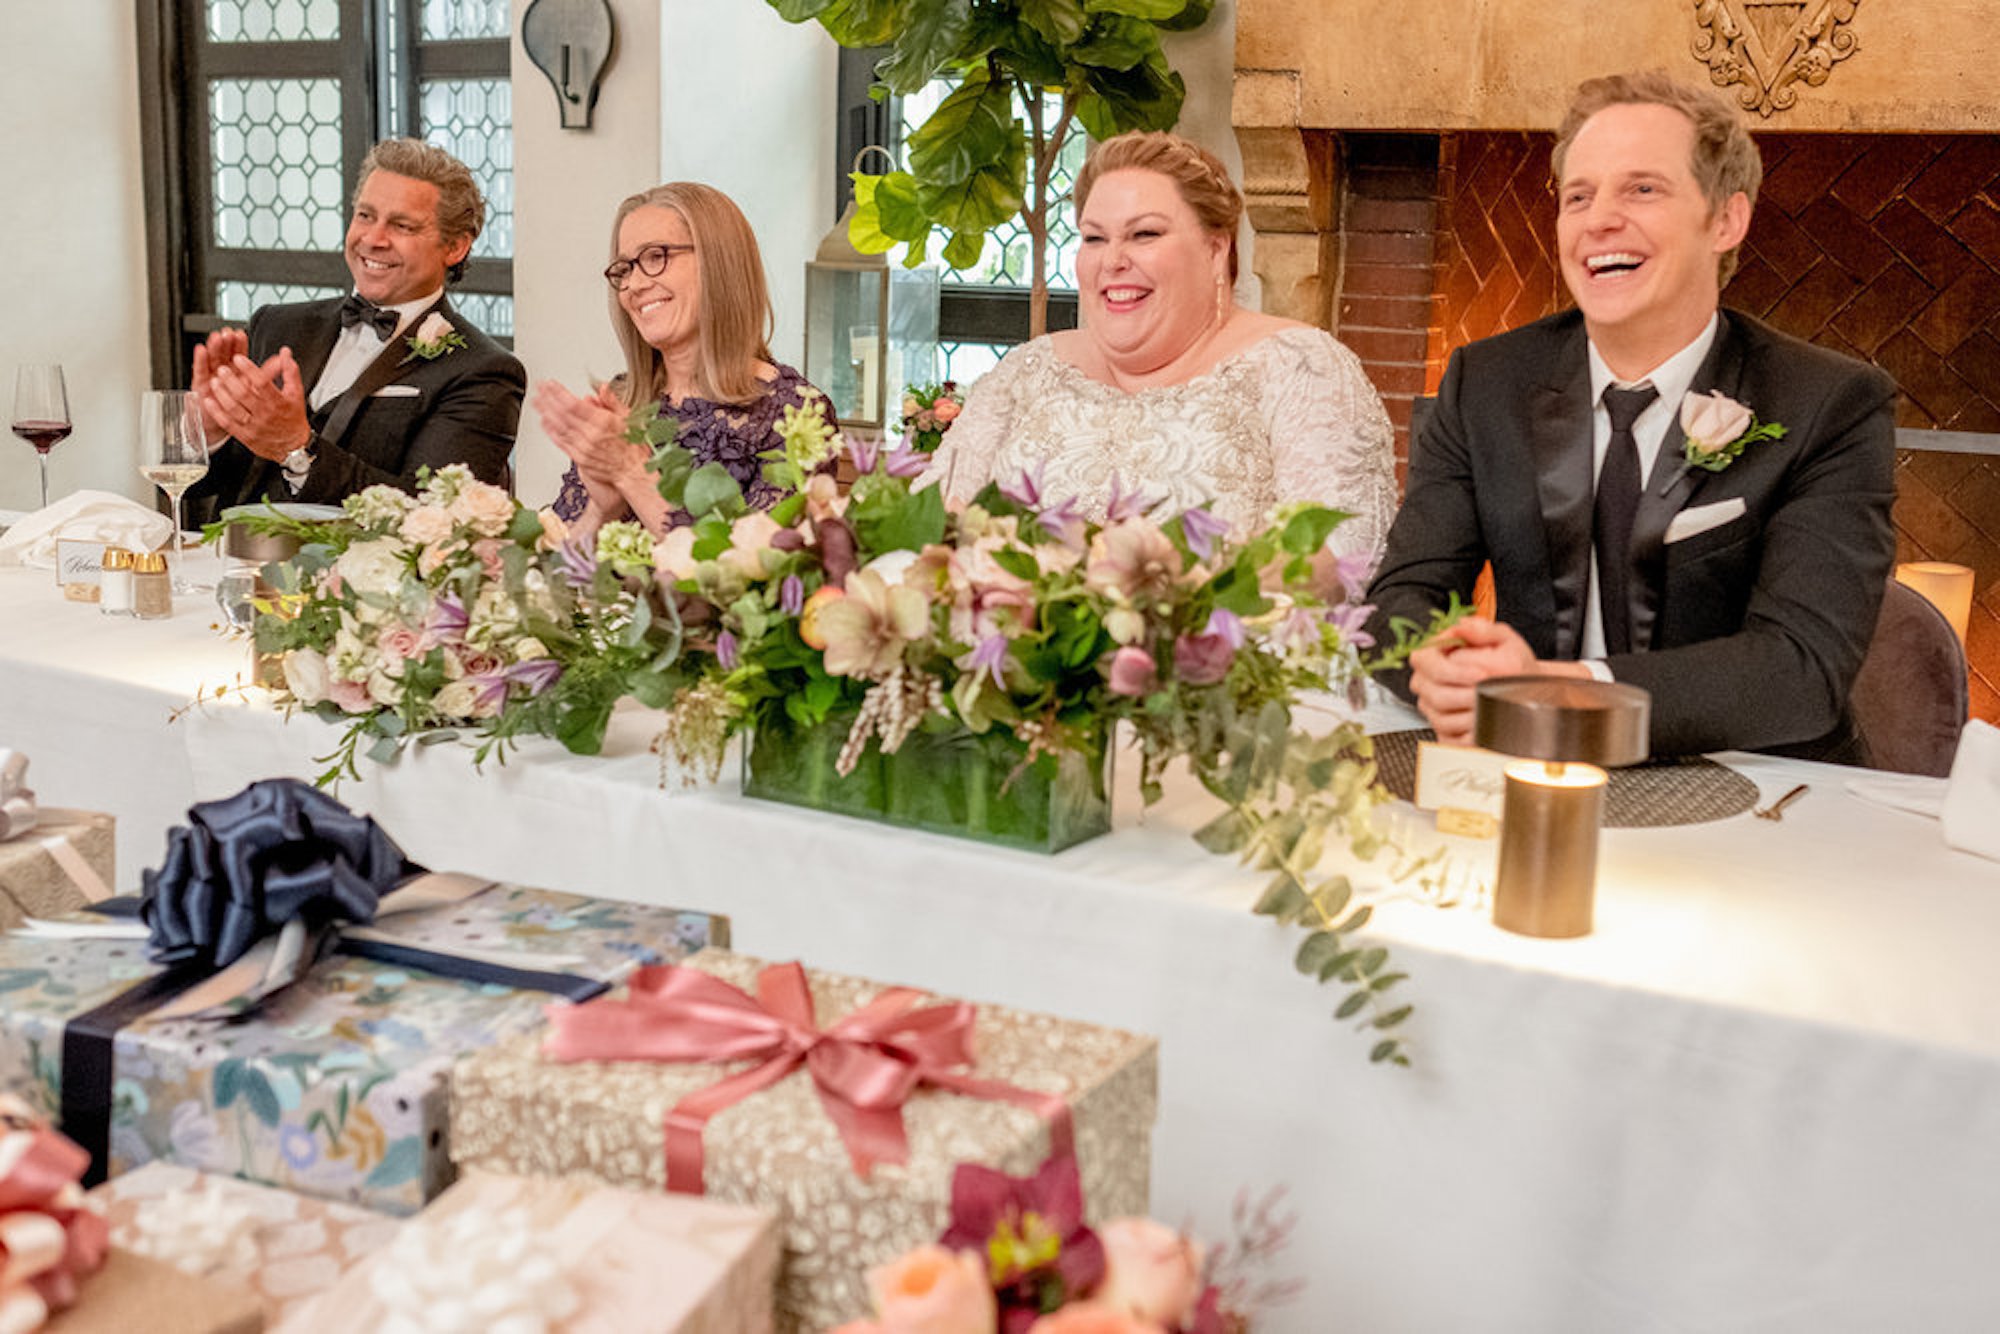 Miguel, Rebecca, Kate, and Phillip sitting at a table at Kate's wedding in 'This Is Us' Season 6 Episode 13